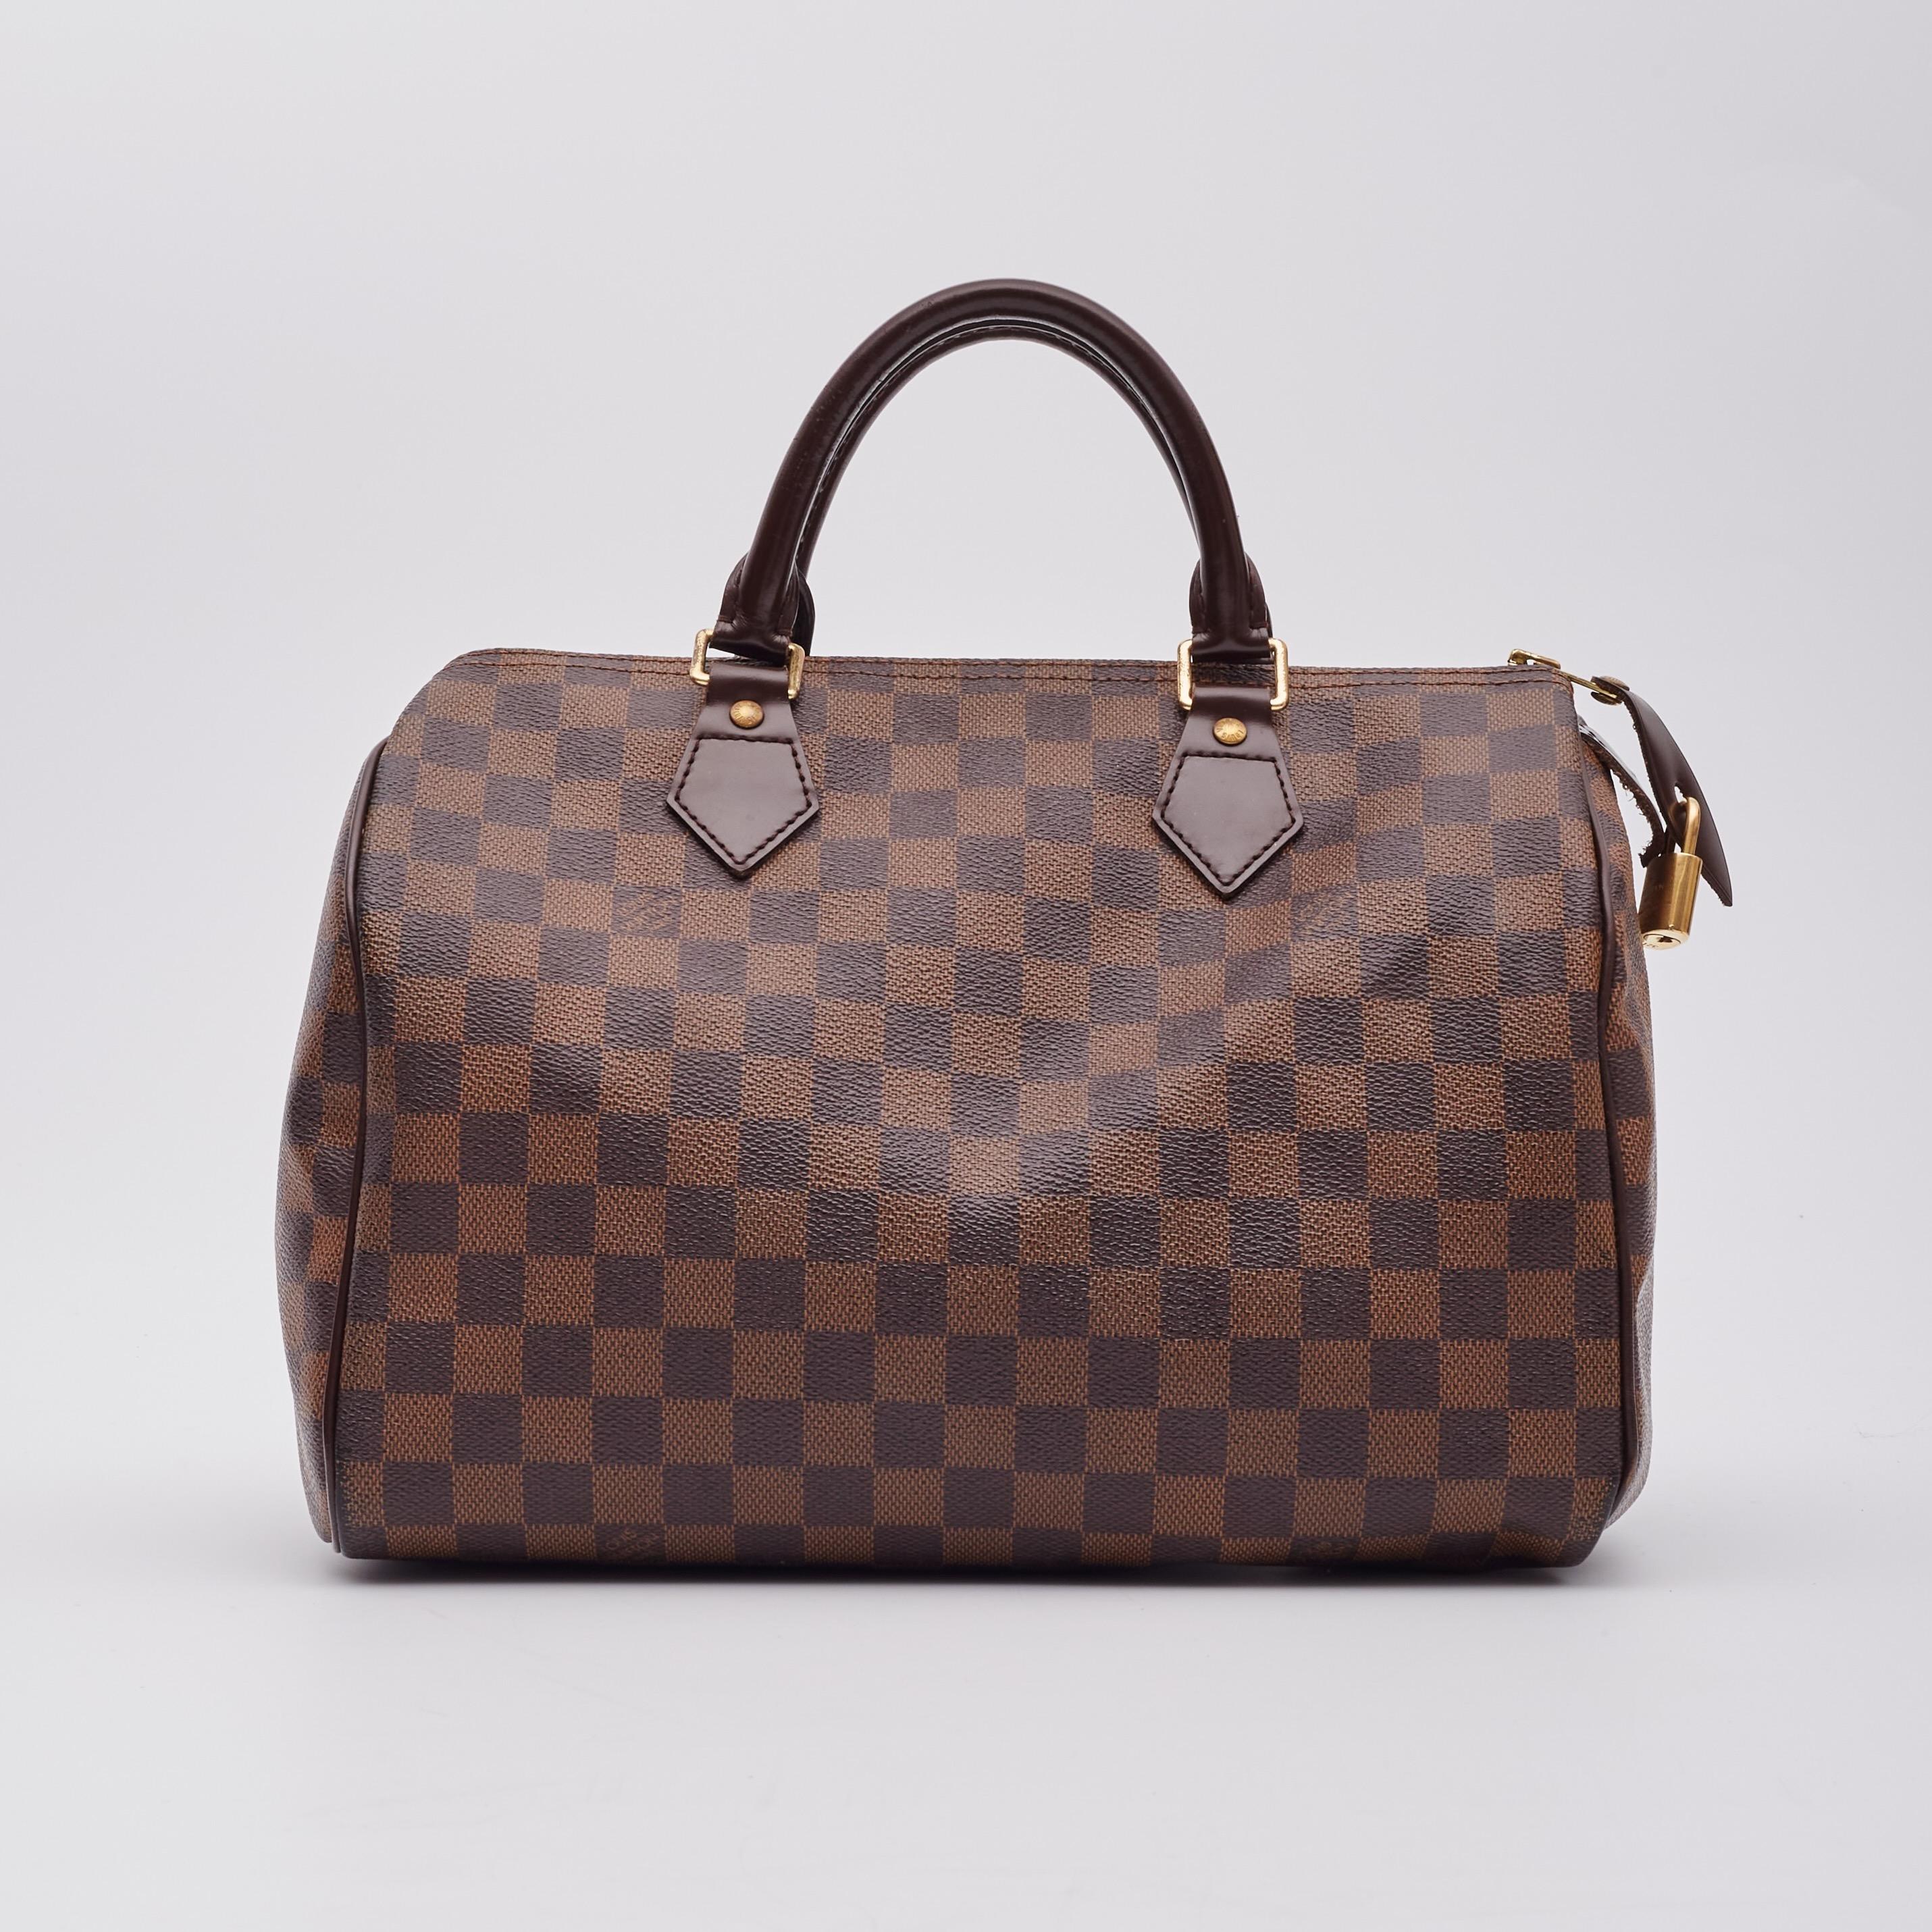 Louis Vuitton Damier Ebene Speedy 30 Handbag With Strap In Excellent Condition For Sale In Montreal, Quebec